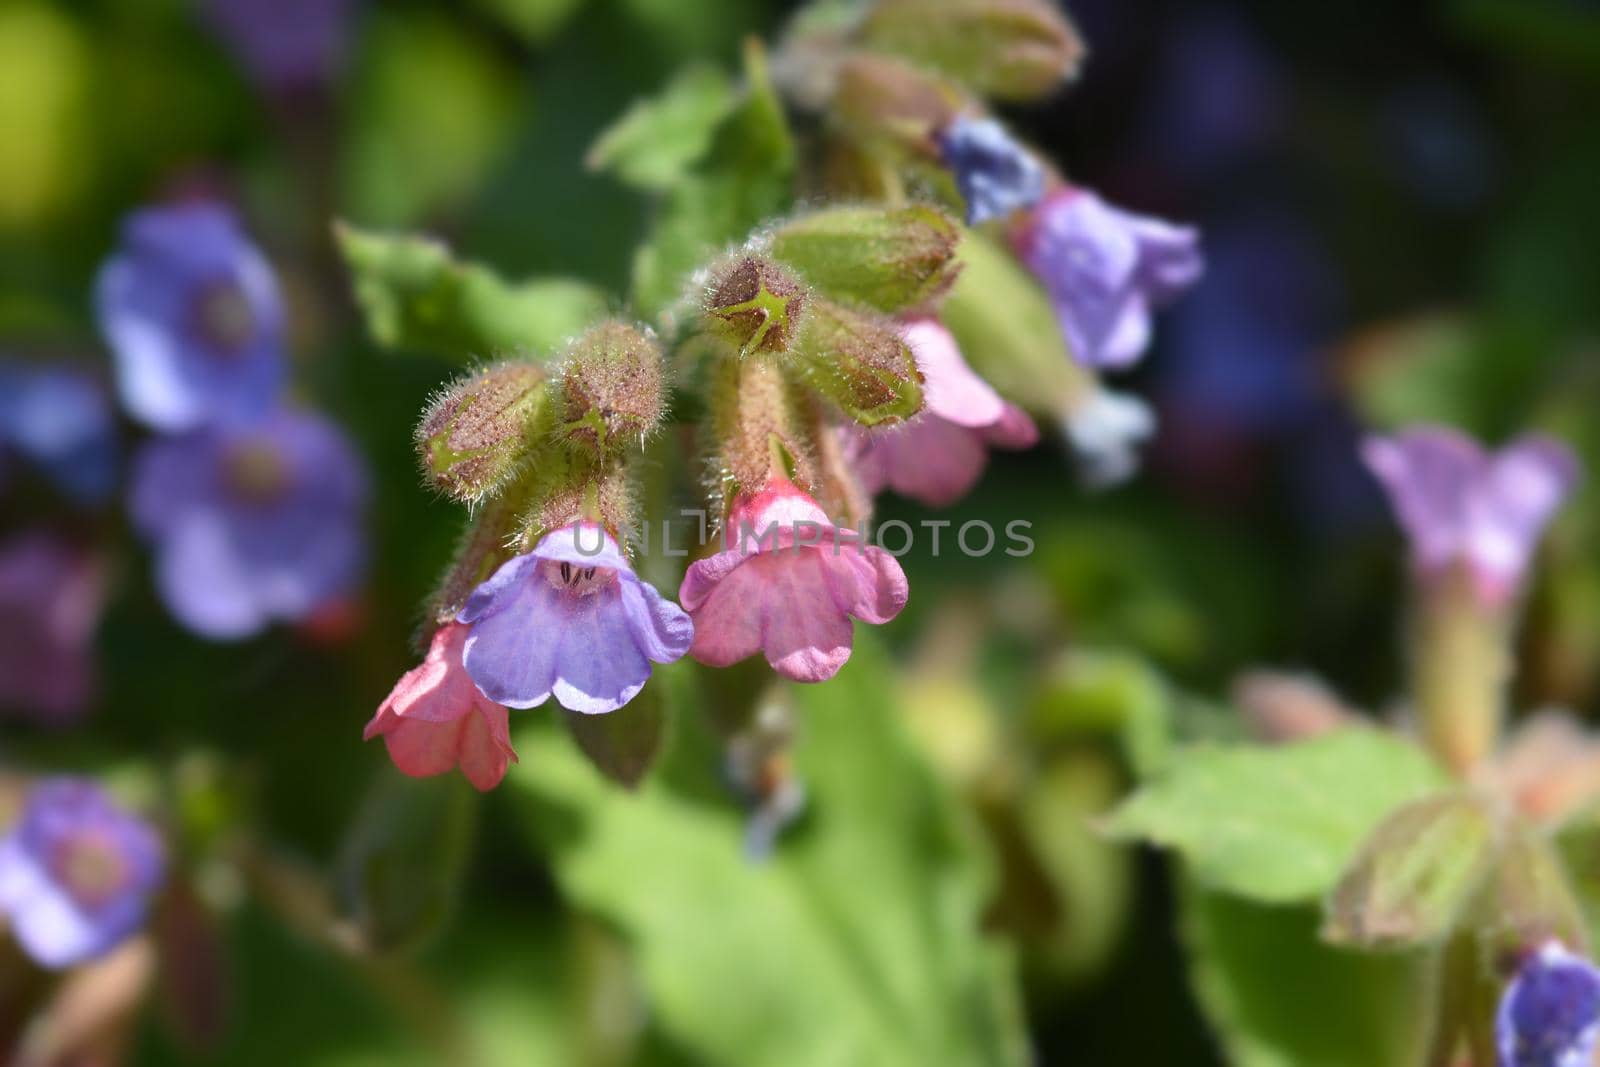 Common lungwort by nahhan